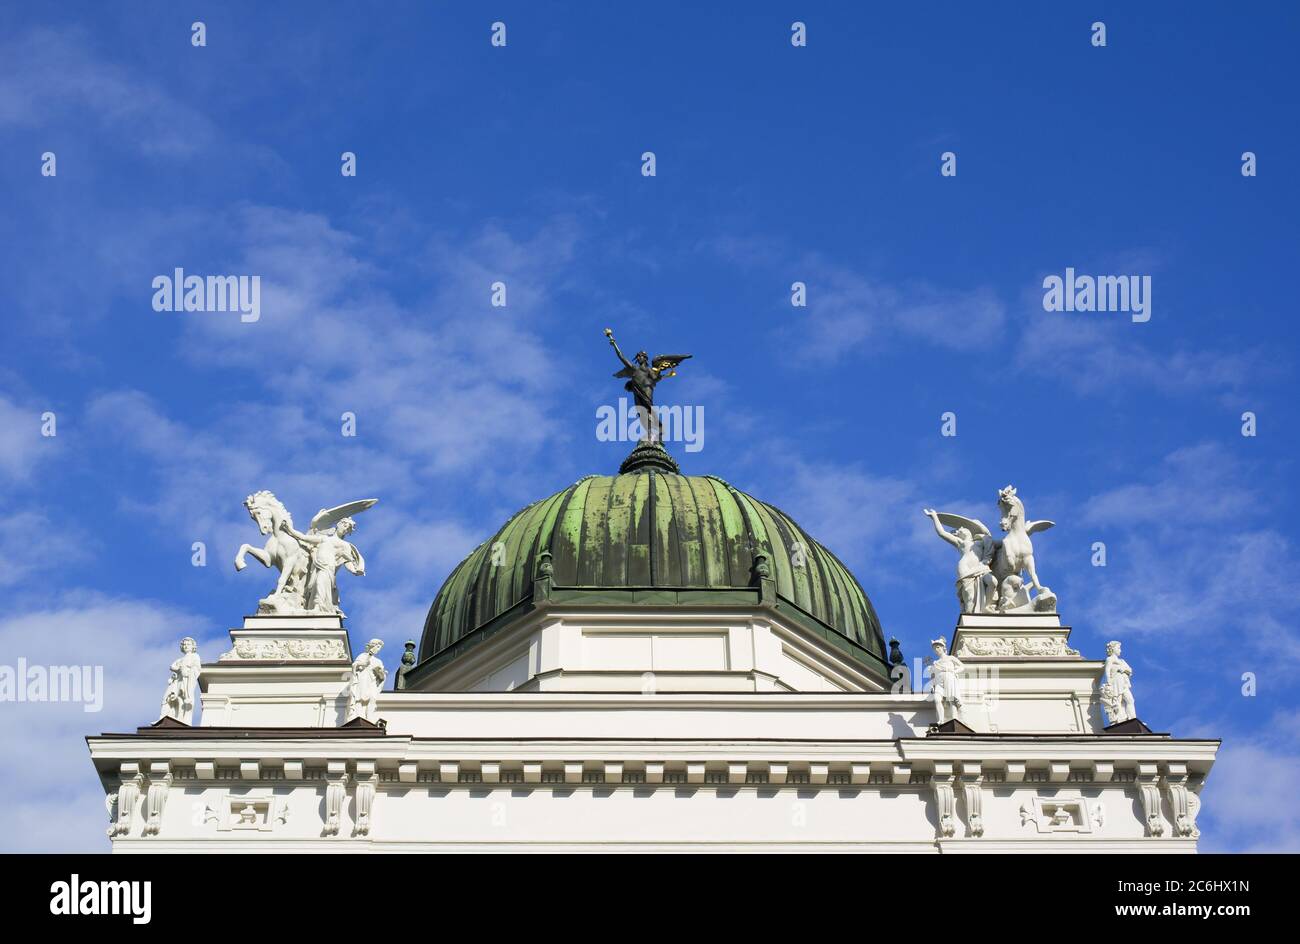 Silesian museum, Opava. Beautiful old historical building in classicist / renaissance style. Statue of Genius on the top of the dome. Symmetrical scul Stock Photo